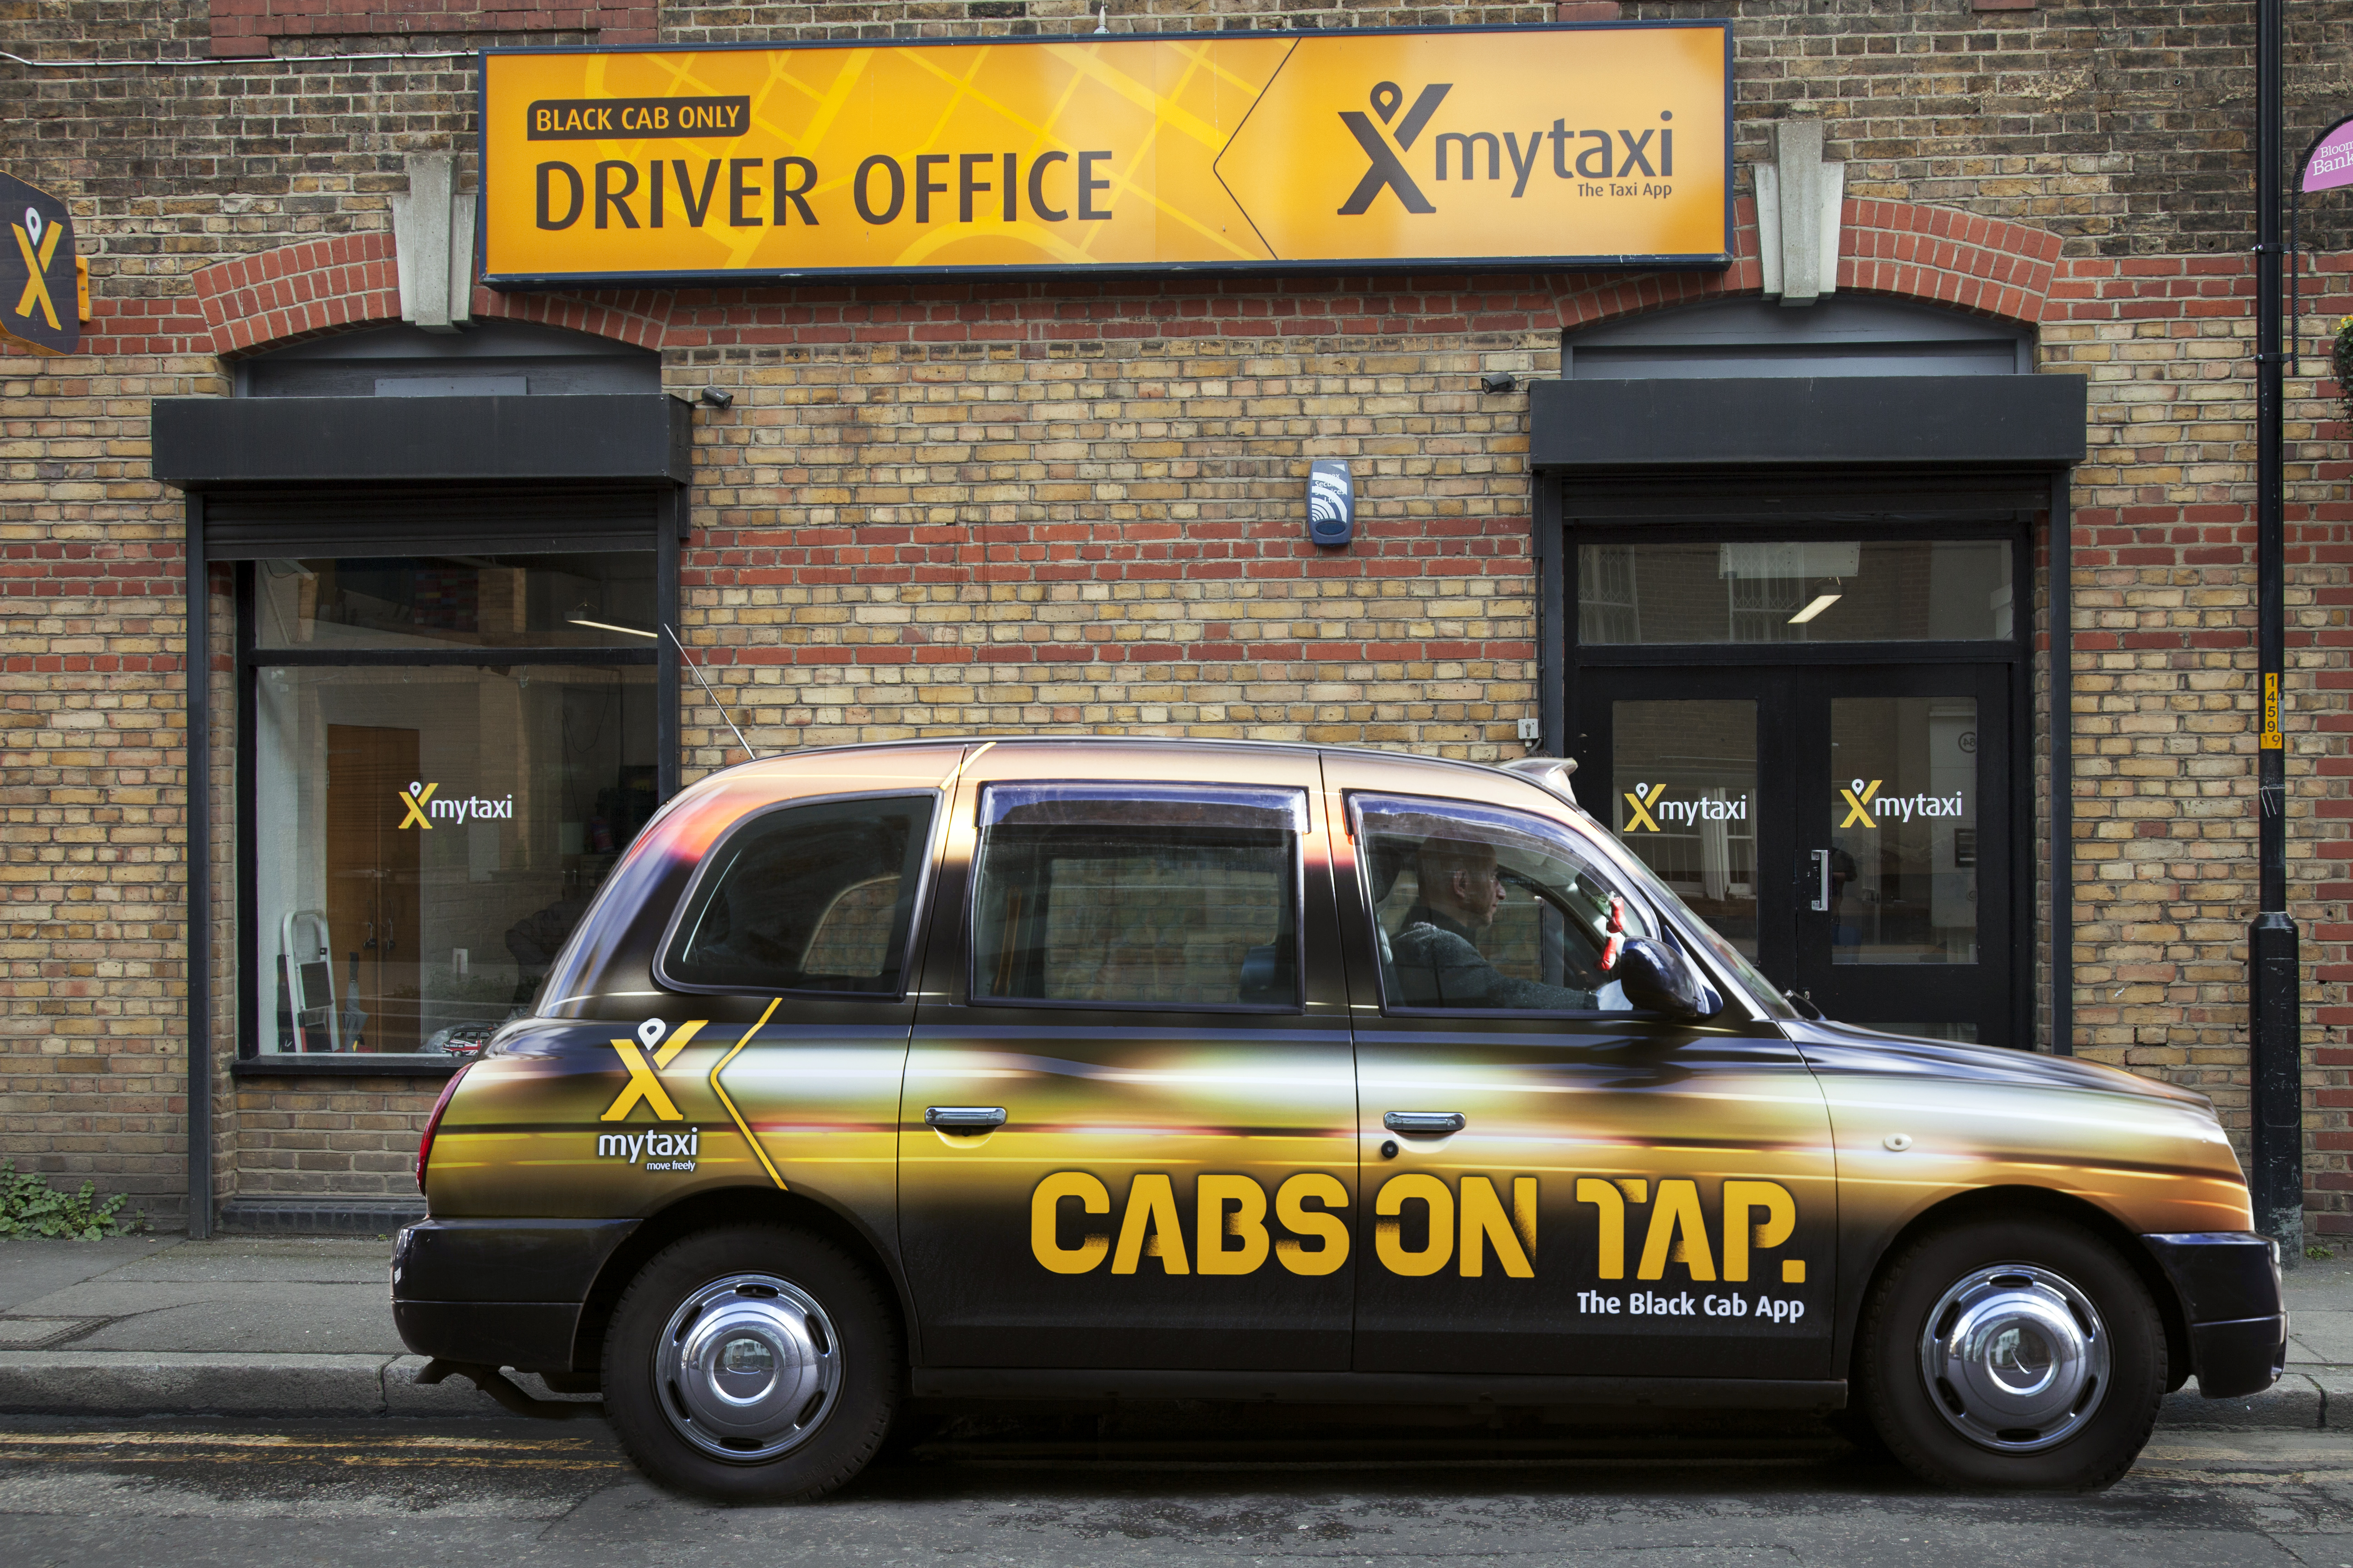 Hailo app being parked in London as mytaxi migration kicks off